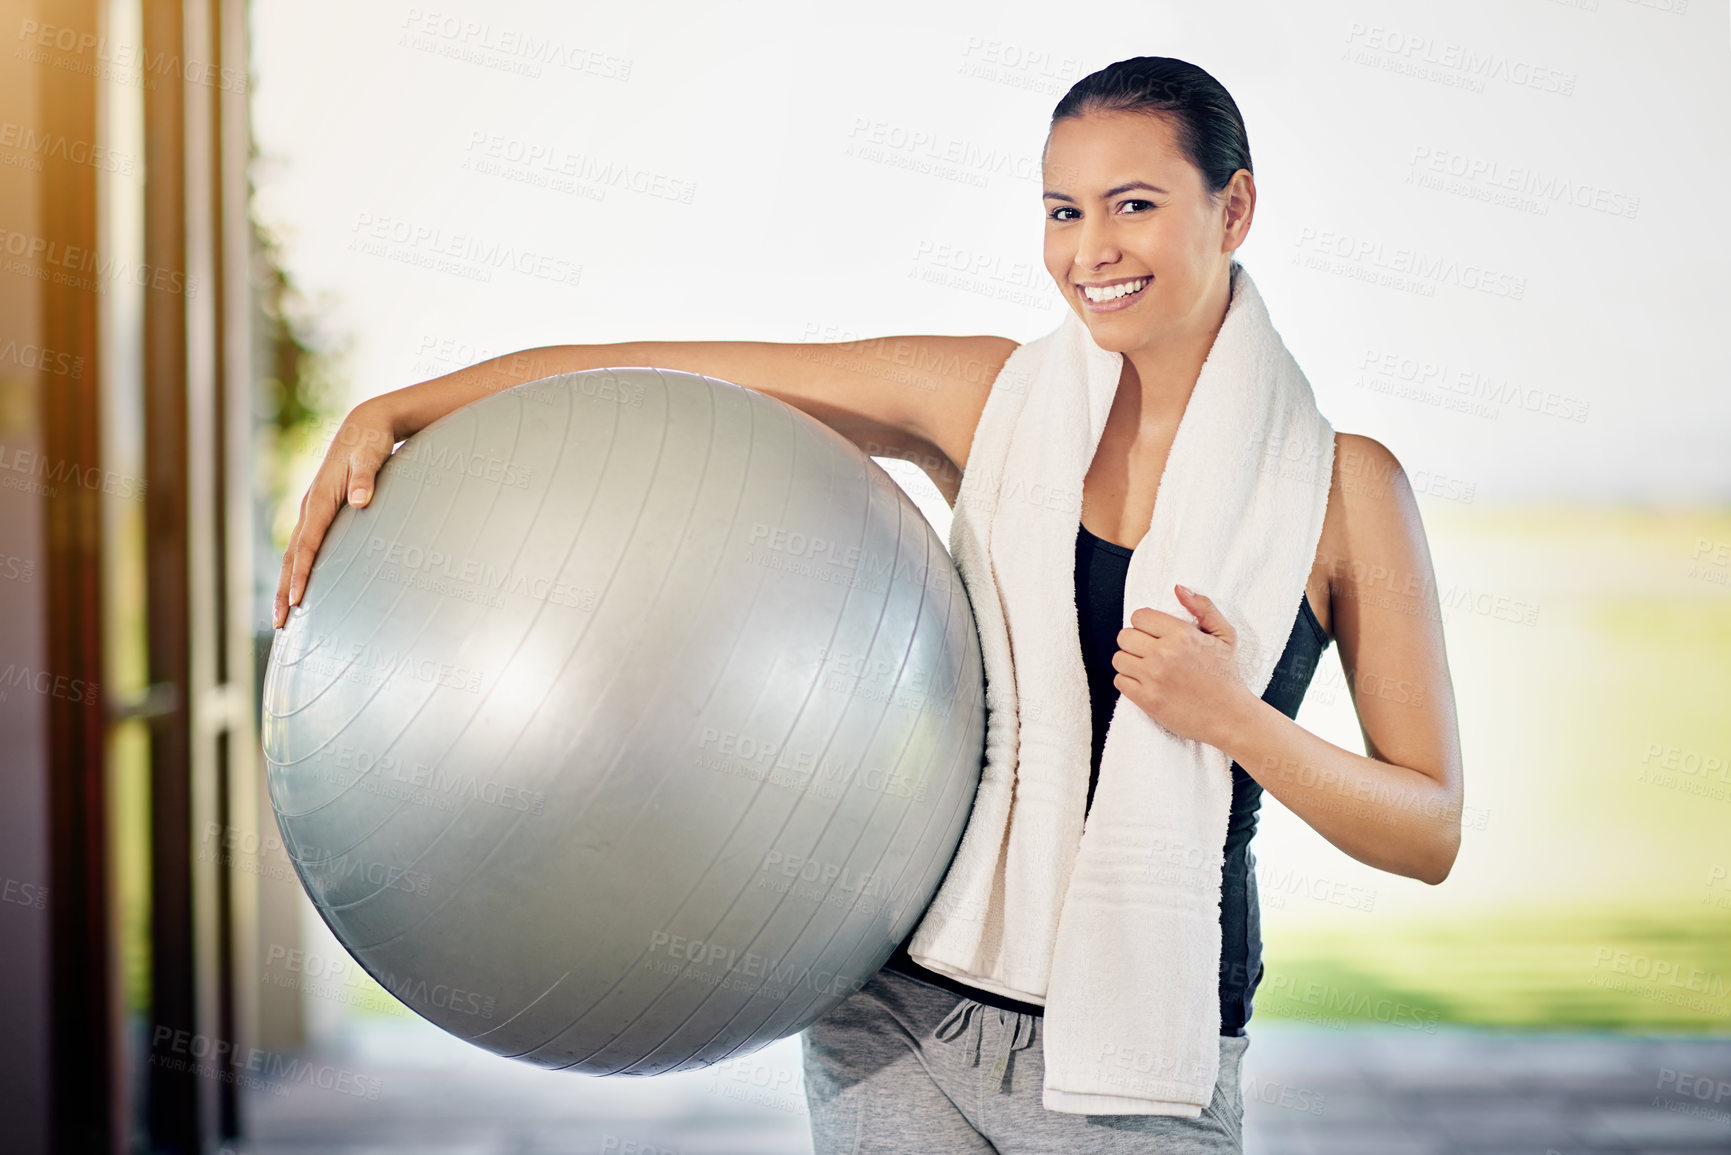 Buy stock photo Cropped portrait of a young woman carrying her exercise ball